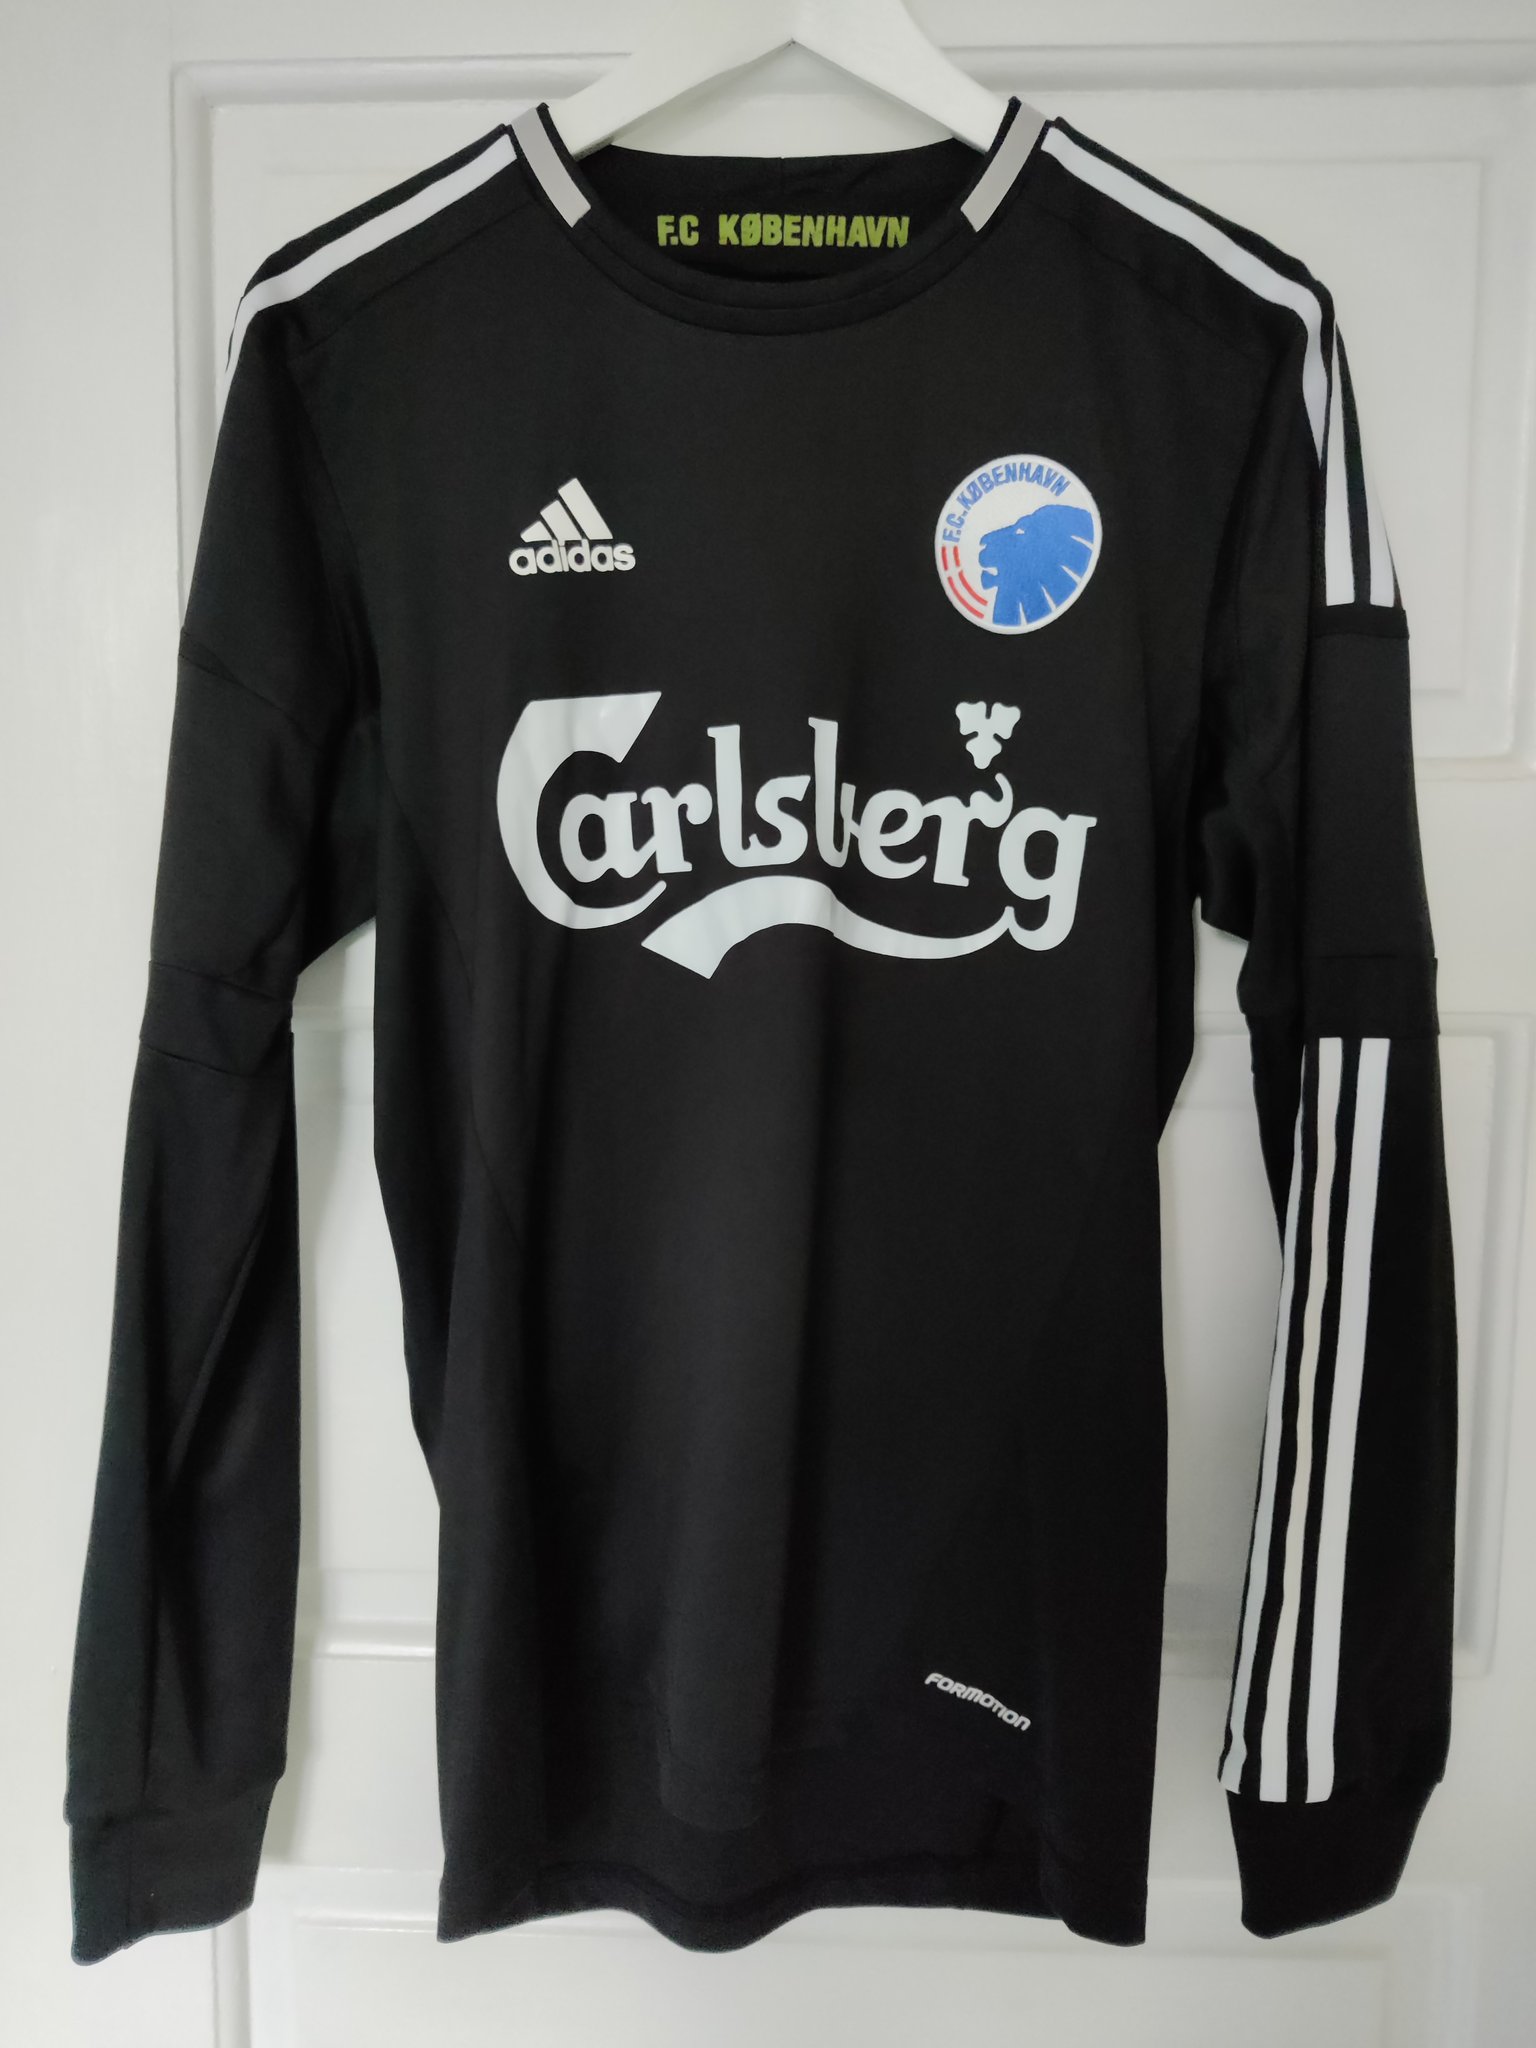 niece salat deform AndysClassicKits on X: "FC Copenhagen away jersey from the 12/13 season.  This is from the year FCK turned 20 years. Not player issued.  #classicfootballshirts #footballshirt #kbhsv #fckøbenhavn  #vintagefootballkits #soccerjersey #jerseycollection https ...